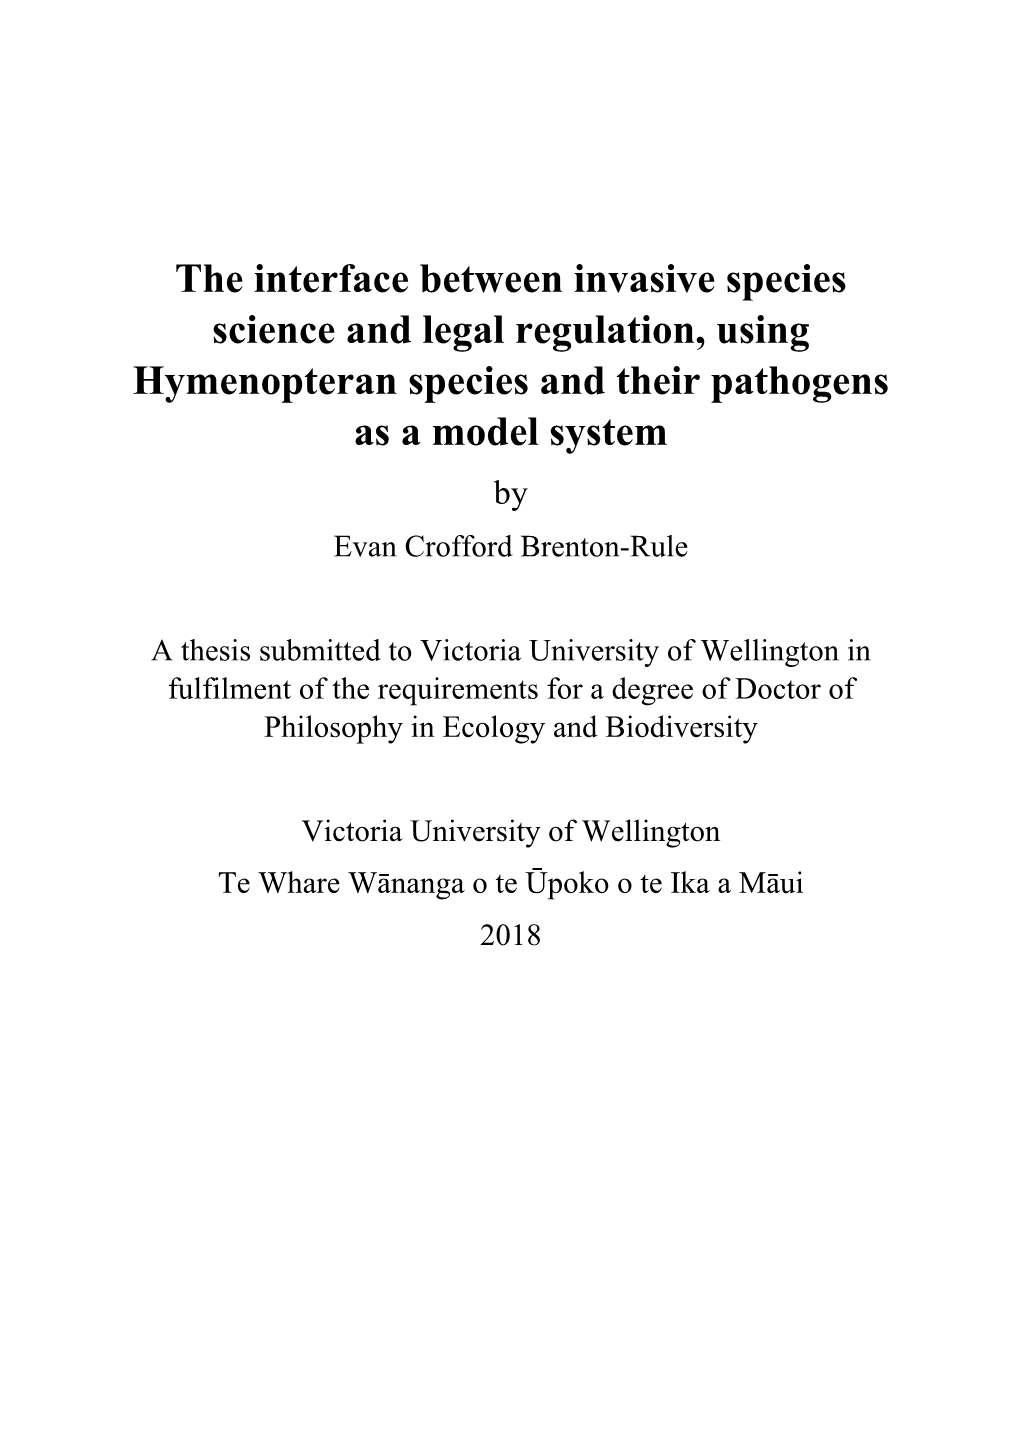 The Interface Between Invasive Species Science and Legal Regulation, Using Hymenopteran Species and Their Pathogens As a Model System by Evan Crofford Brenton-Rule